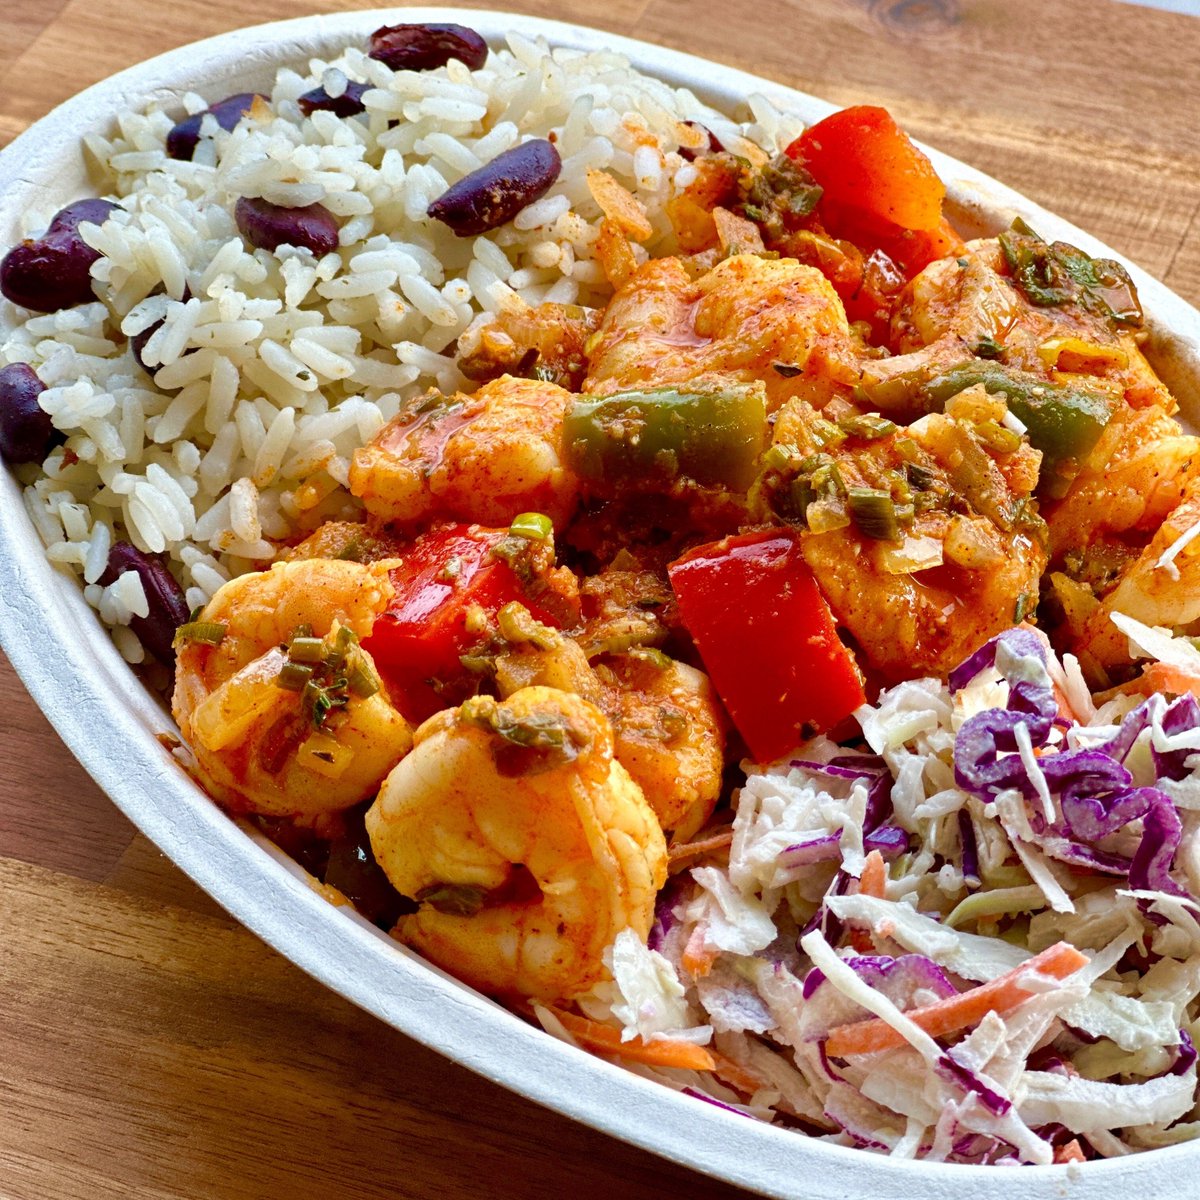 Spice up your Tuesday with our Pepper Shrimp Bowl.
A spicy blend of shrimp, sweet peppers, onions, scallions & scotch bonnet peppers.

#joeyturks #islandgrill #peppershrimp #buildyourownbowl #islandflavours #hamilton #islandvibes #isalndfood